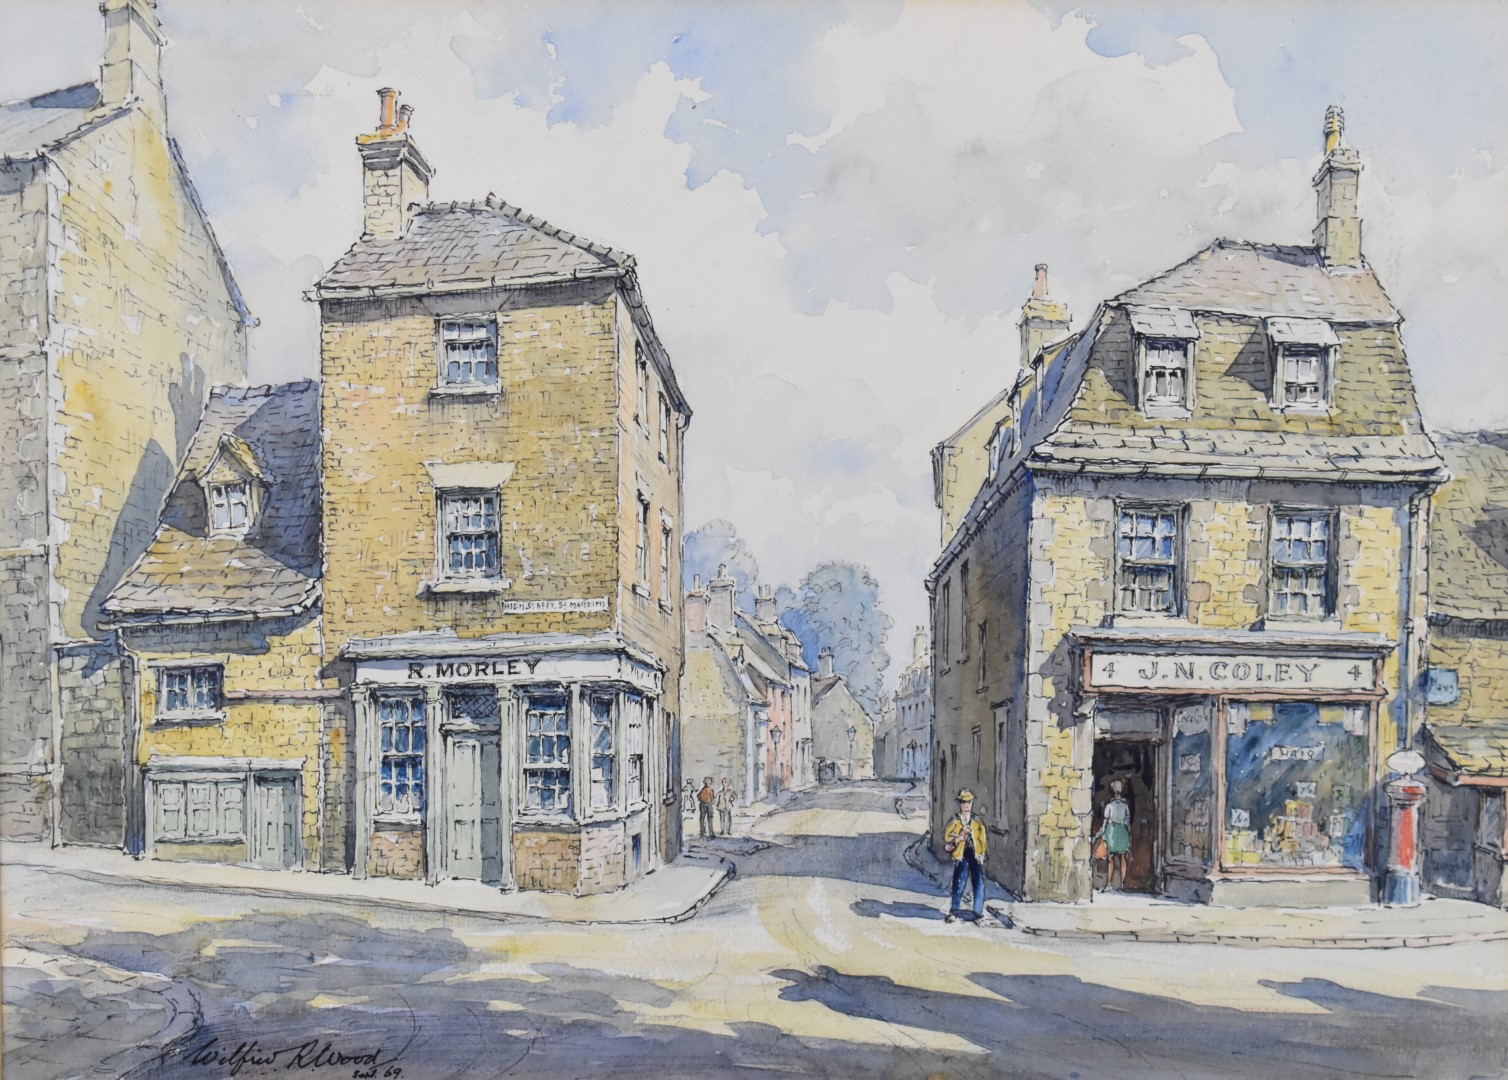 Wilfrid R Wood (1888-1976) watercolour of Welland Road and High Street, St Martins, Stamford,